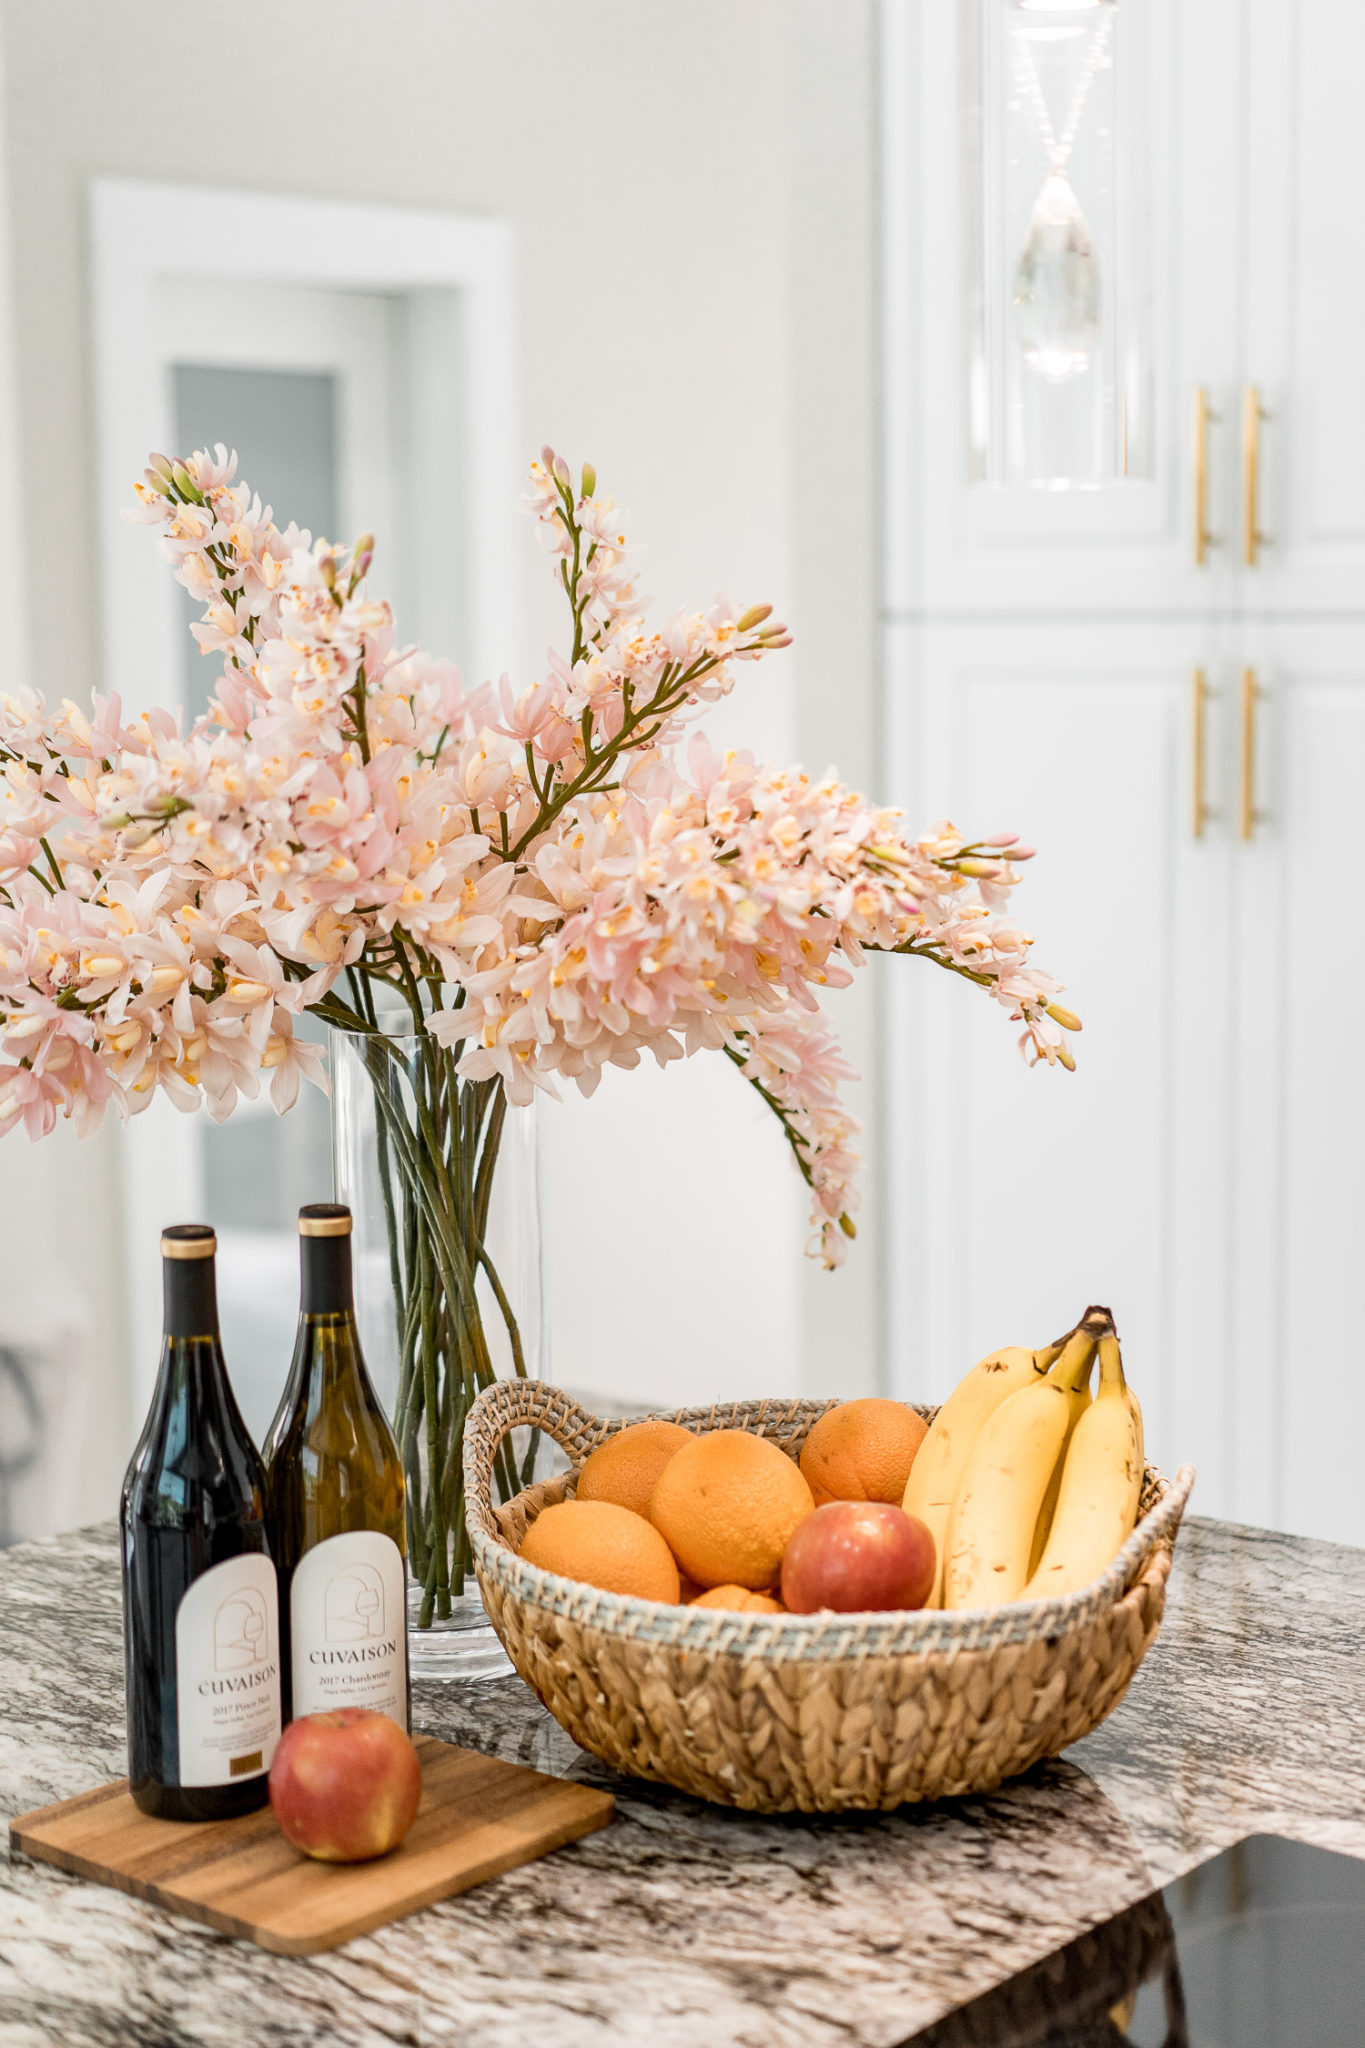 basket for fruits on countertop